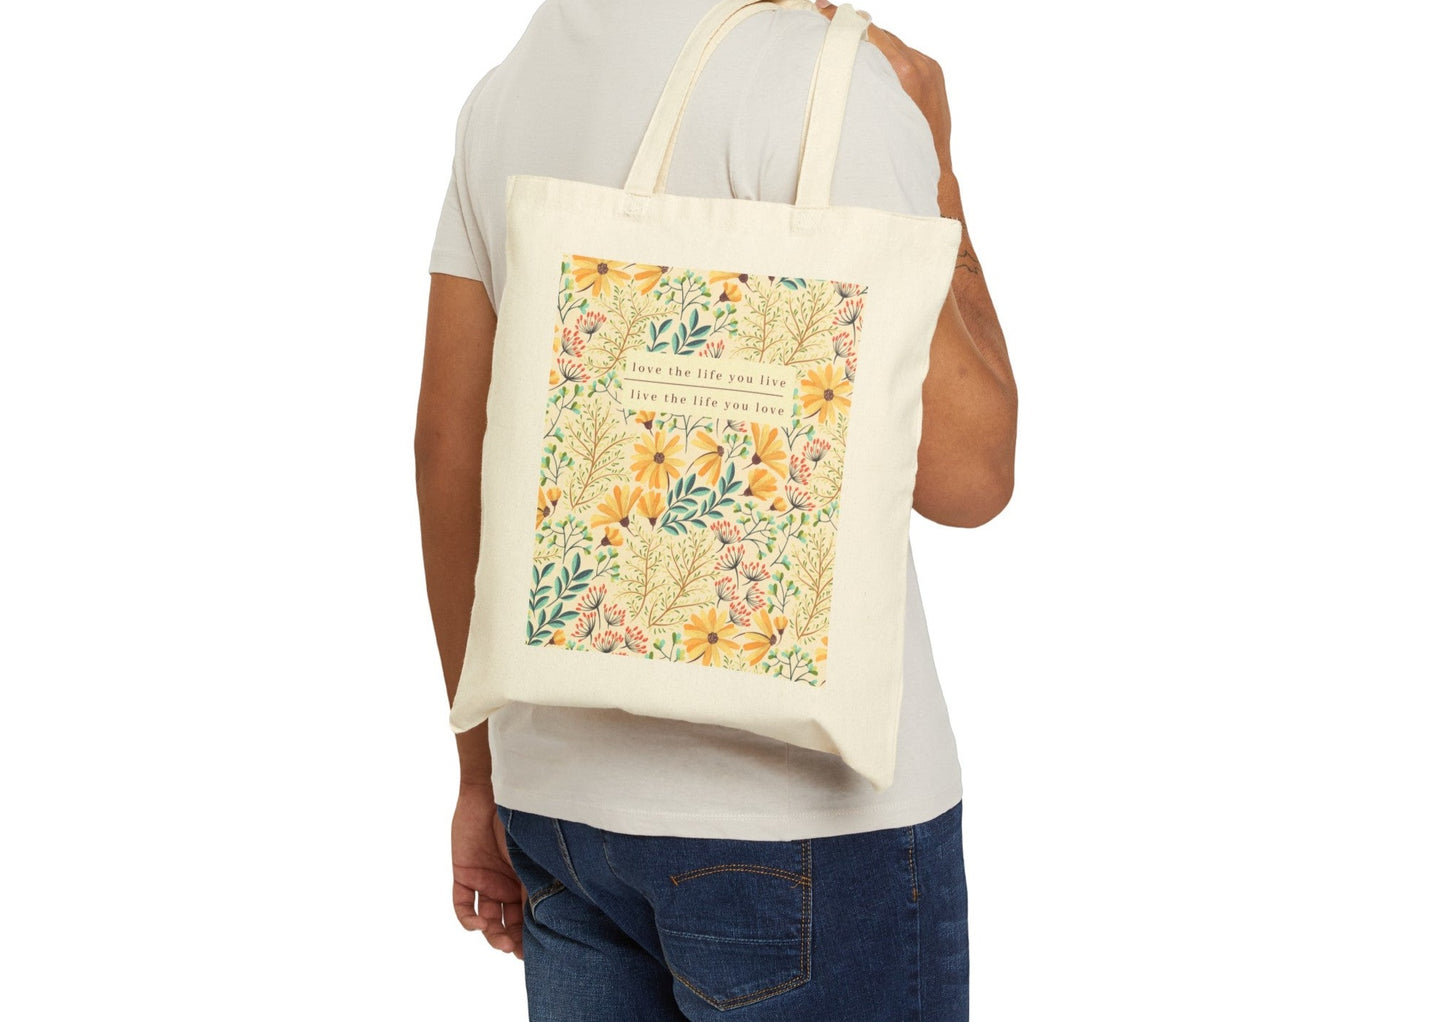 Love the life you live tote bag